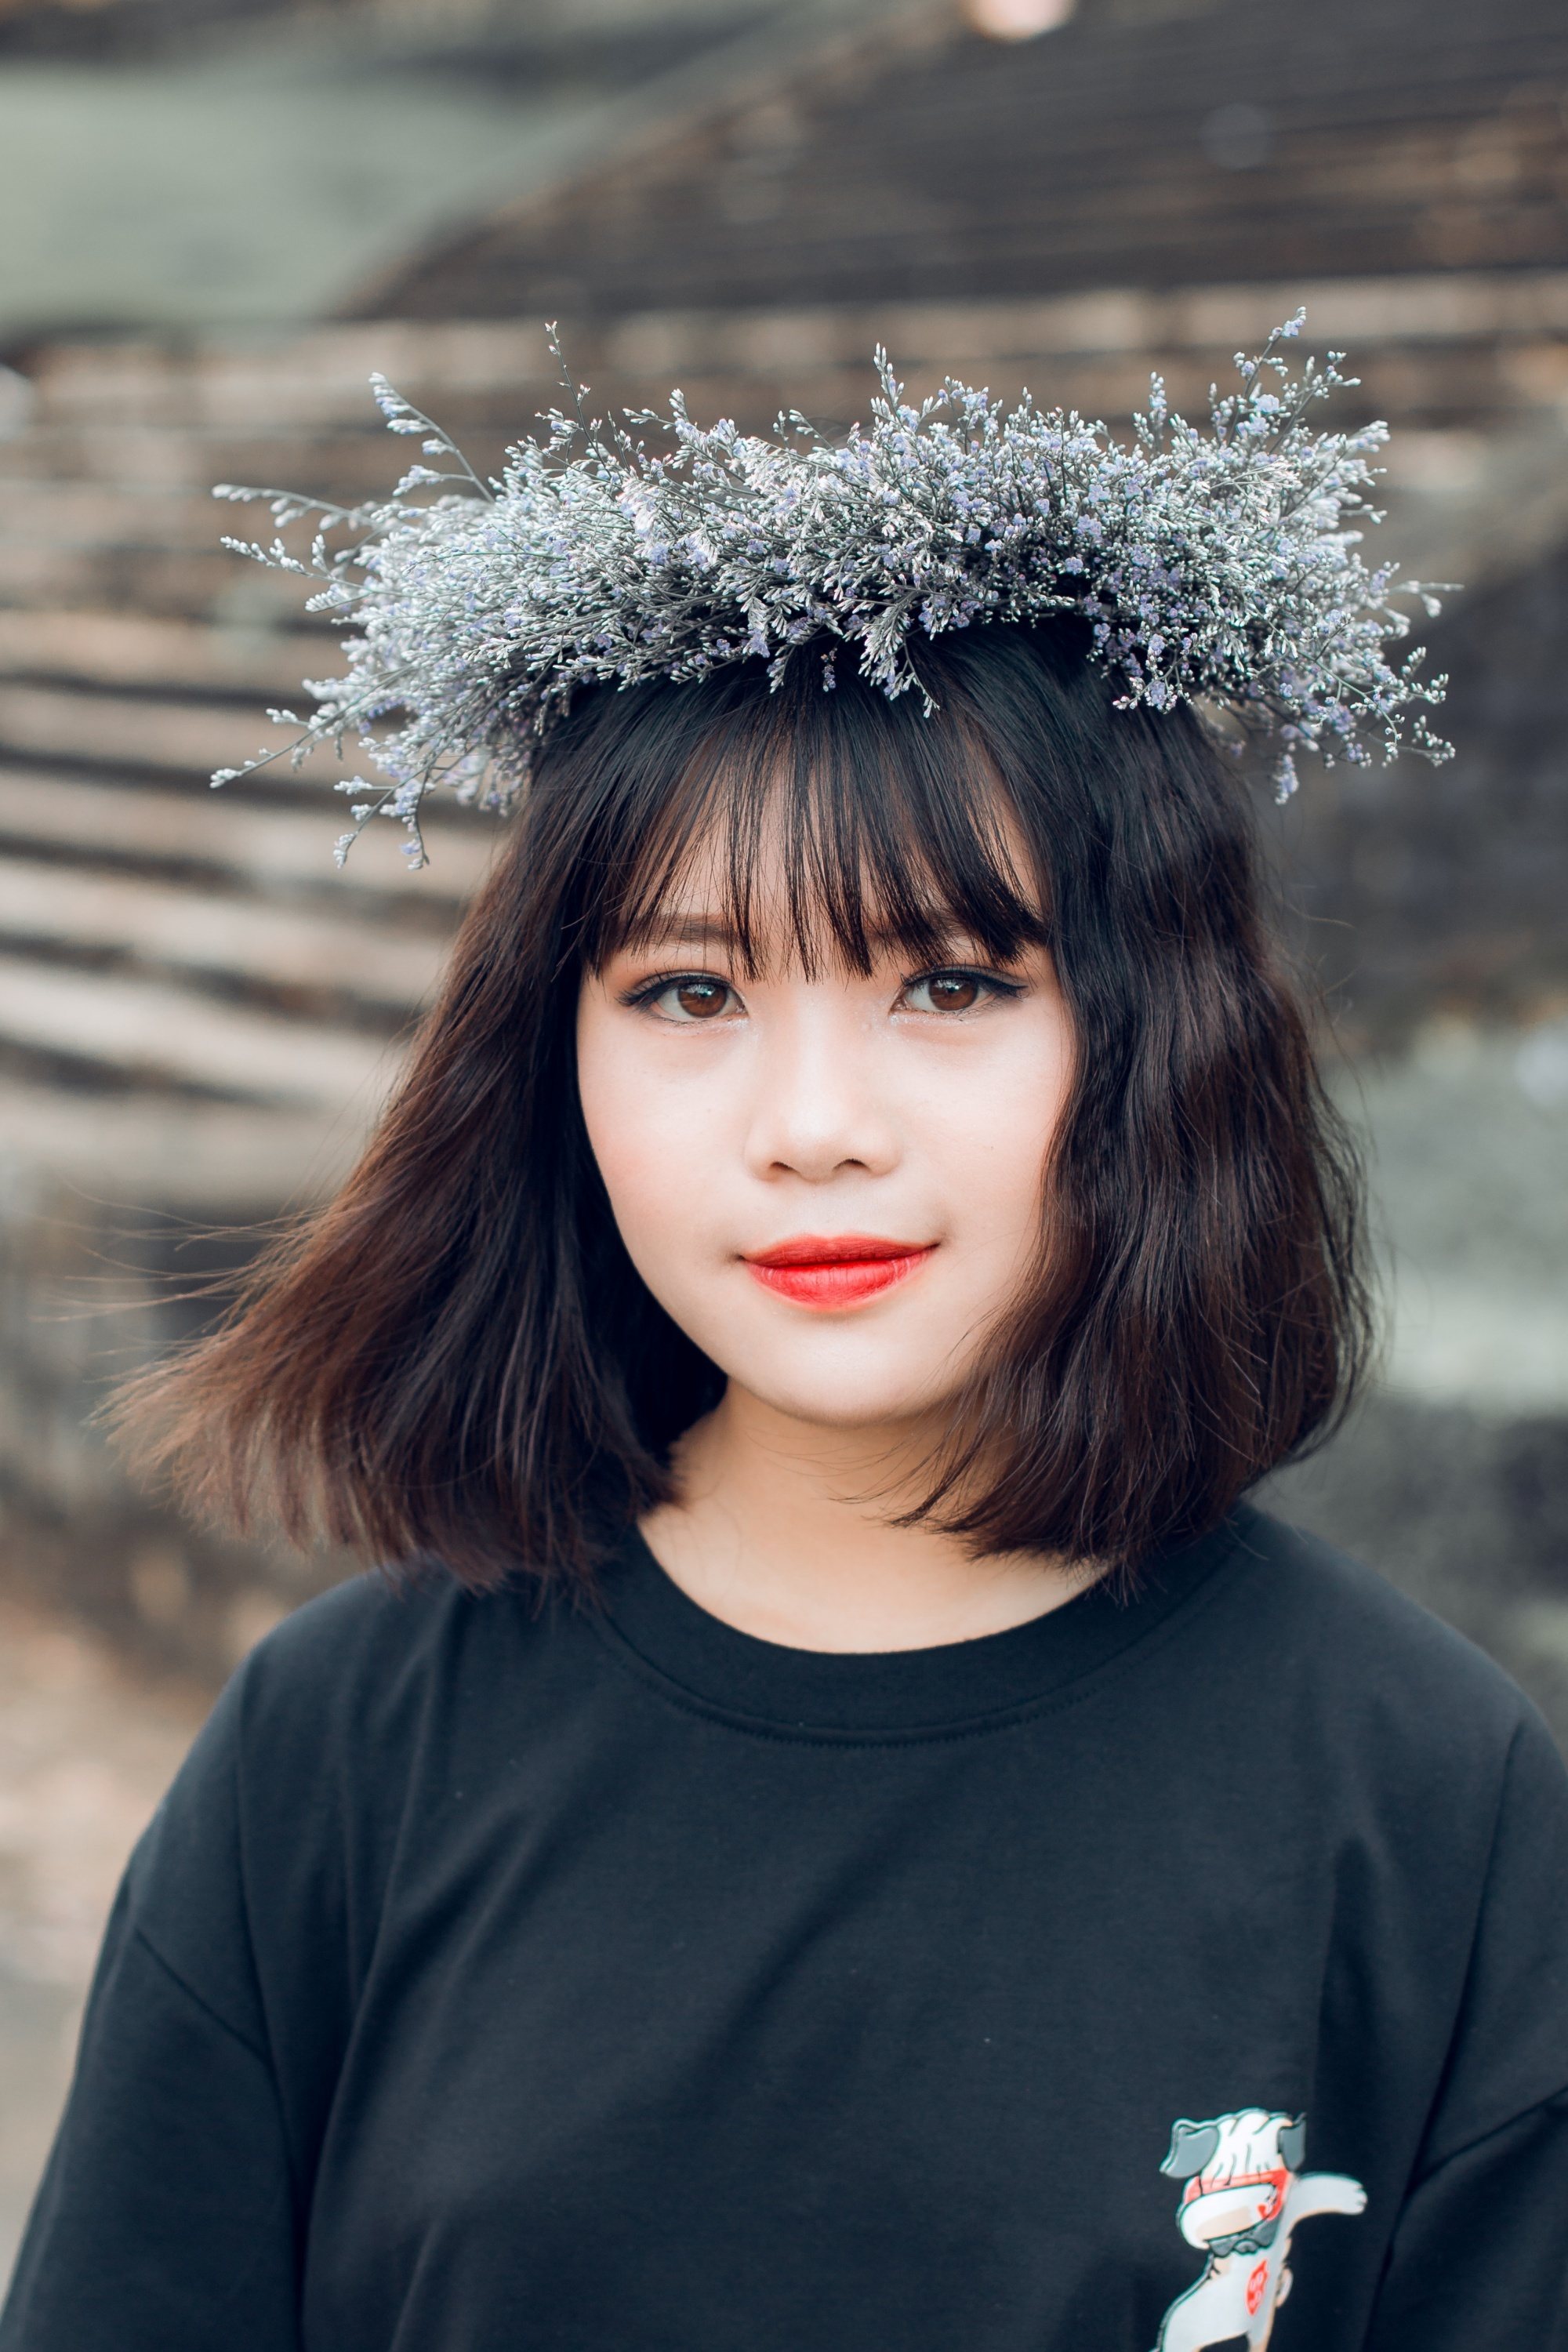 Asian woman with short wavy hair and bangs wearing a flower crown